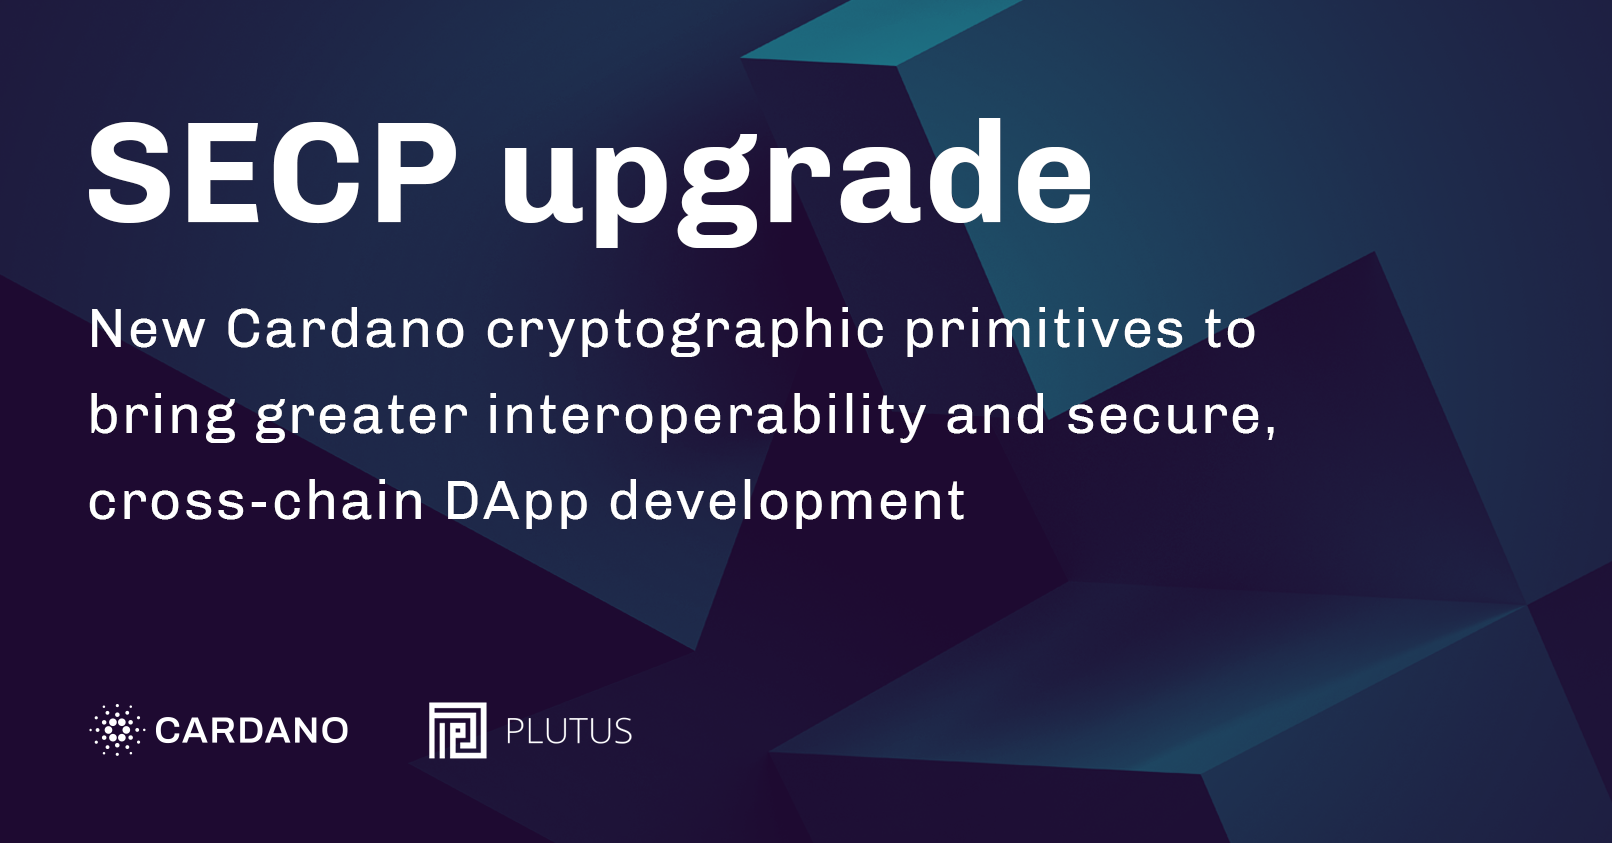 New Cardano cryptographic primitives will bring greater interoperability and secure, cross-chain DApp development